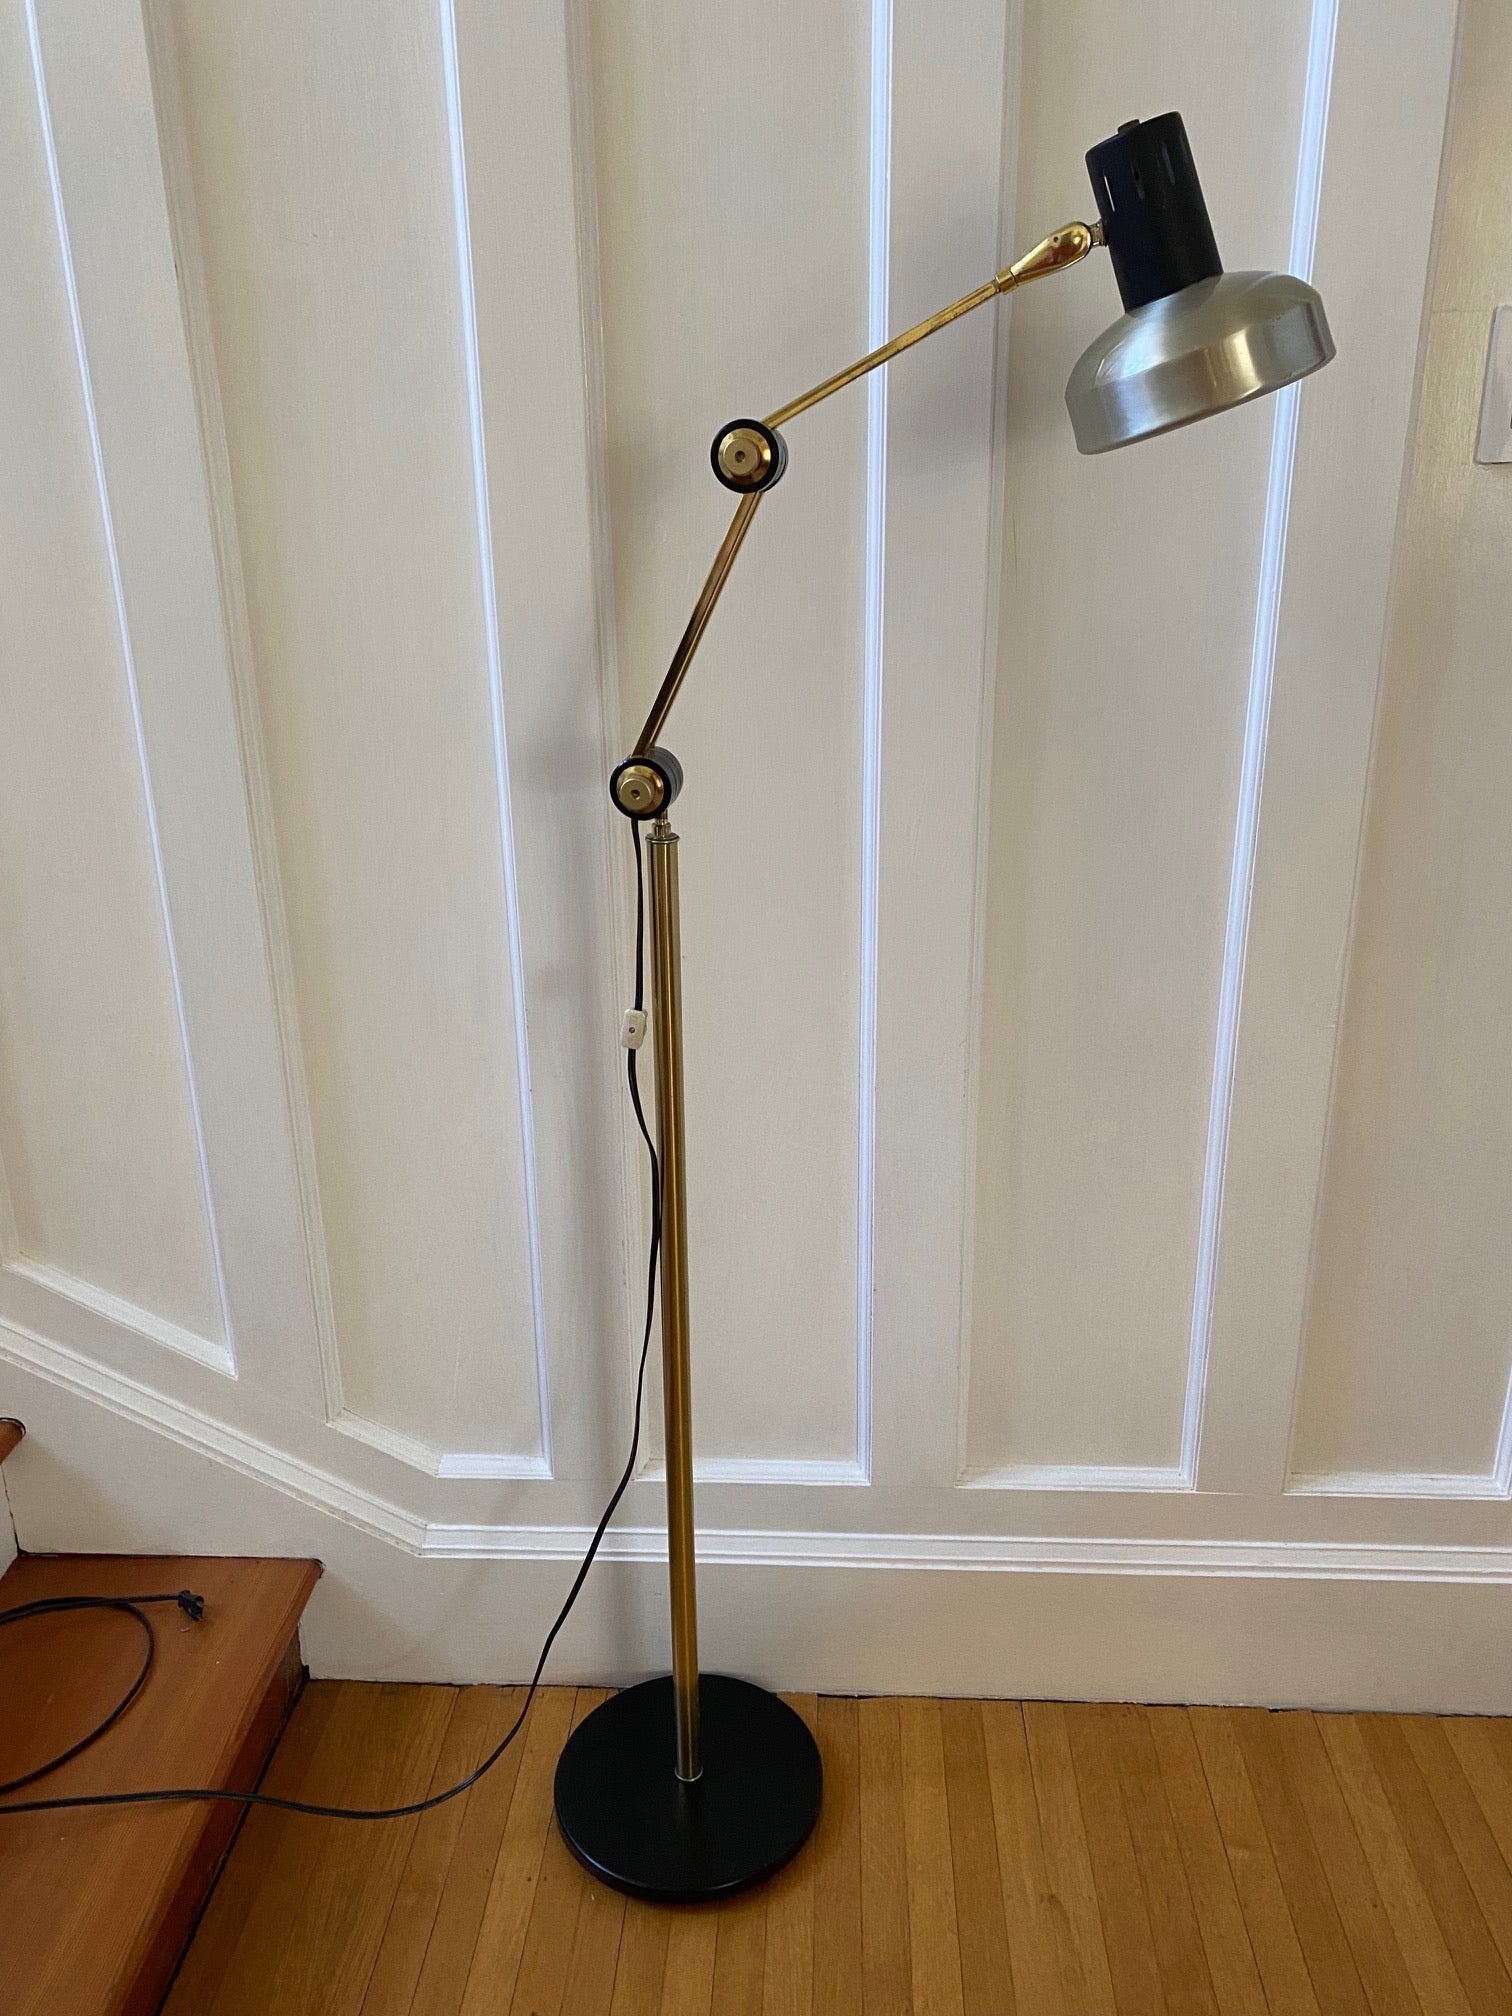 Mid-century brass floor lamp. Retro black knobs at mid-pole adjust height and direction of the lamp. Made by Ward.- Cook Street Vintage